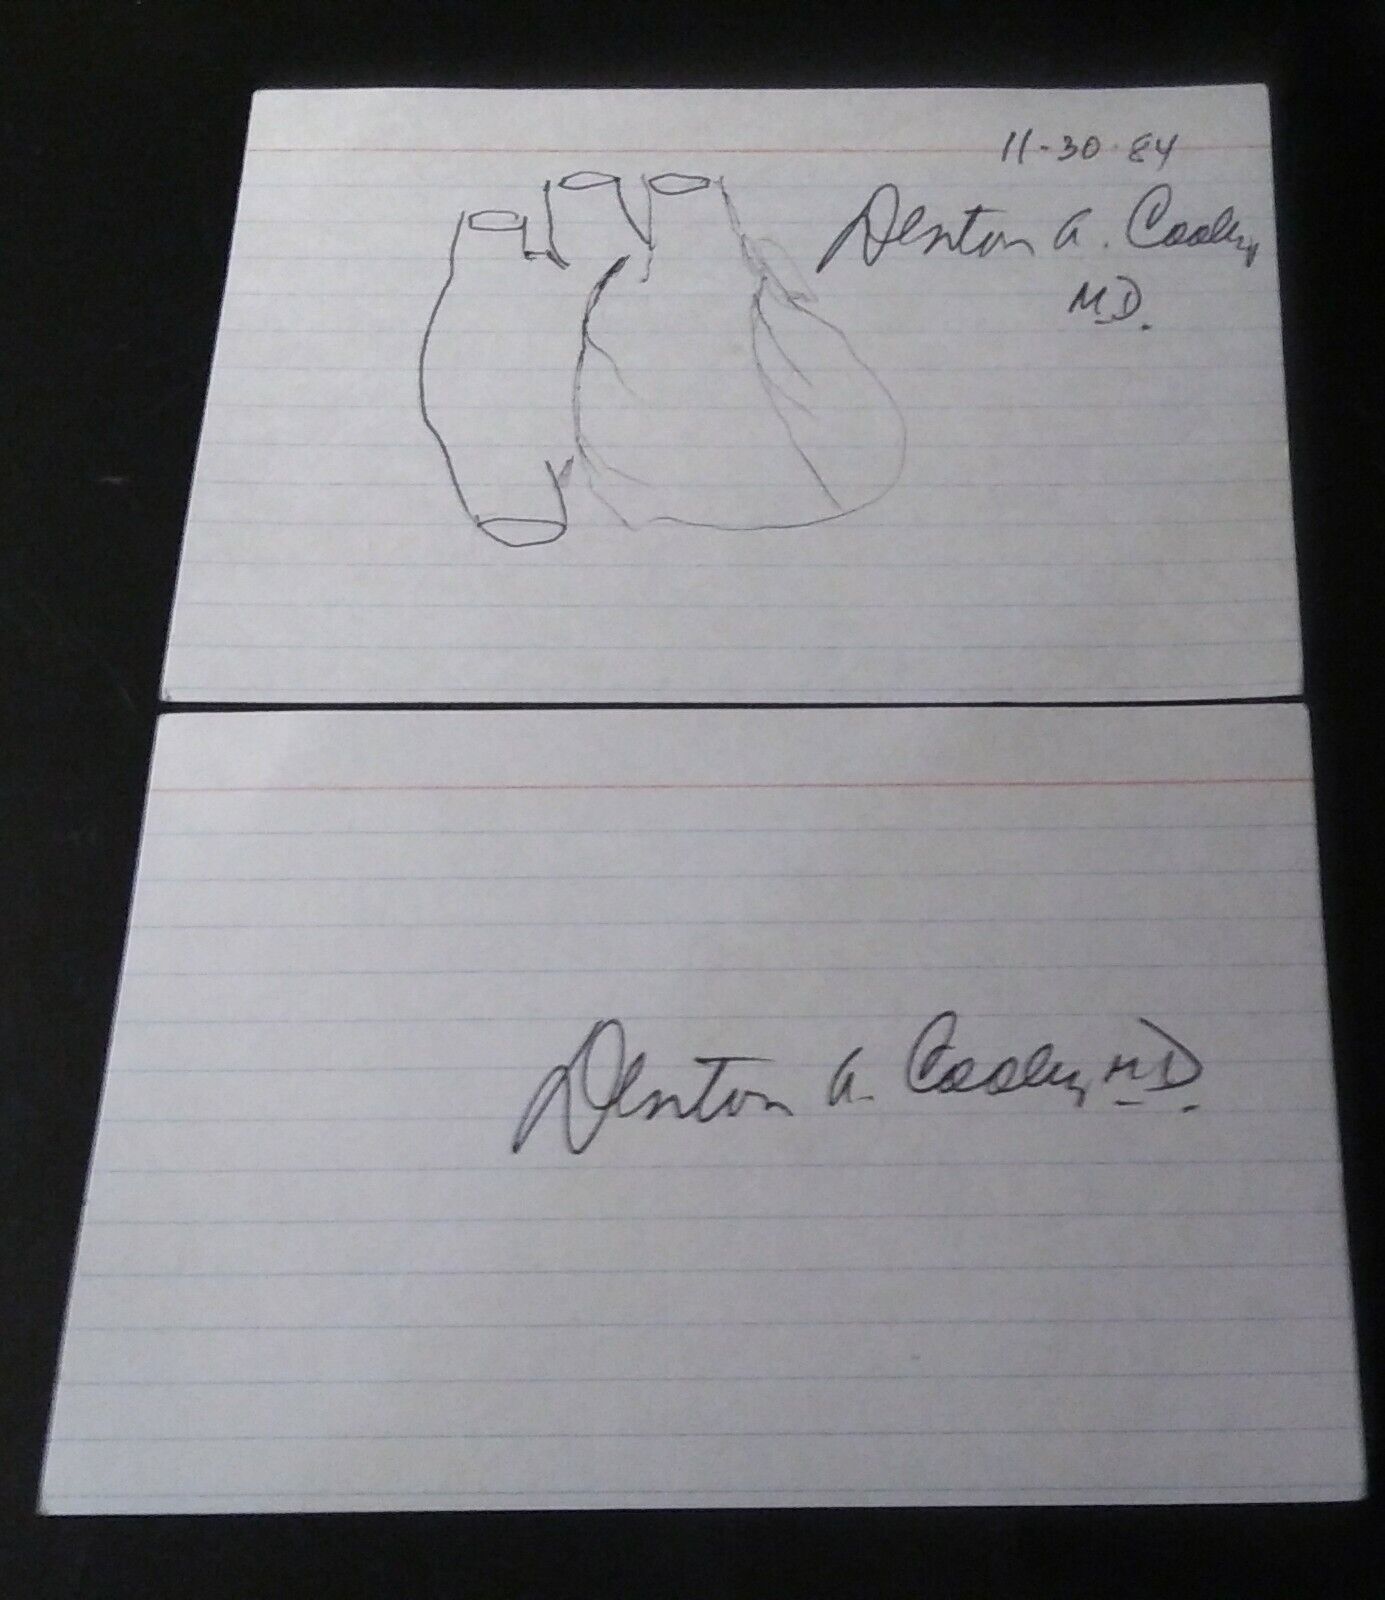  Denton A Cooley MD Autographed DRAWING 1st Surgeon artificial Heart SIGNED CARD